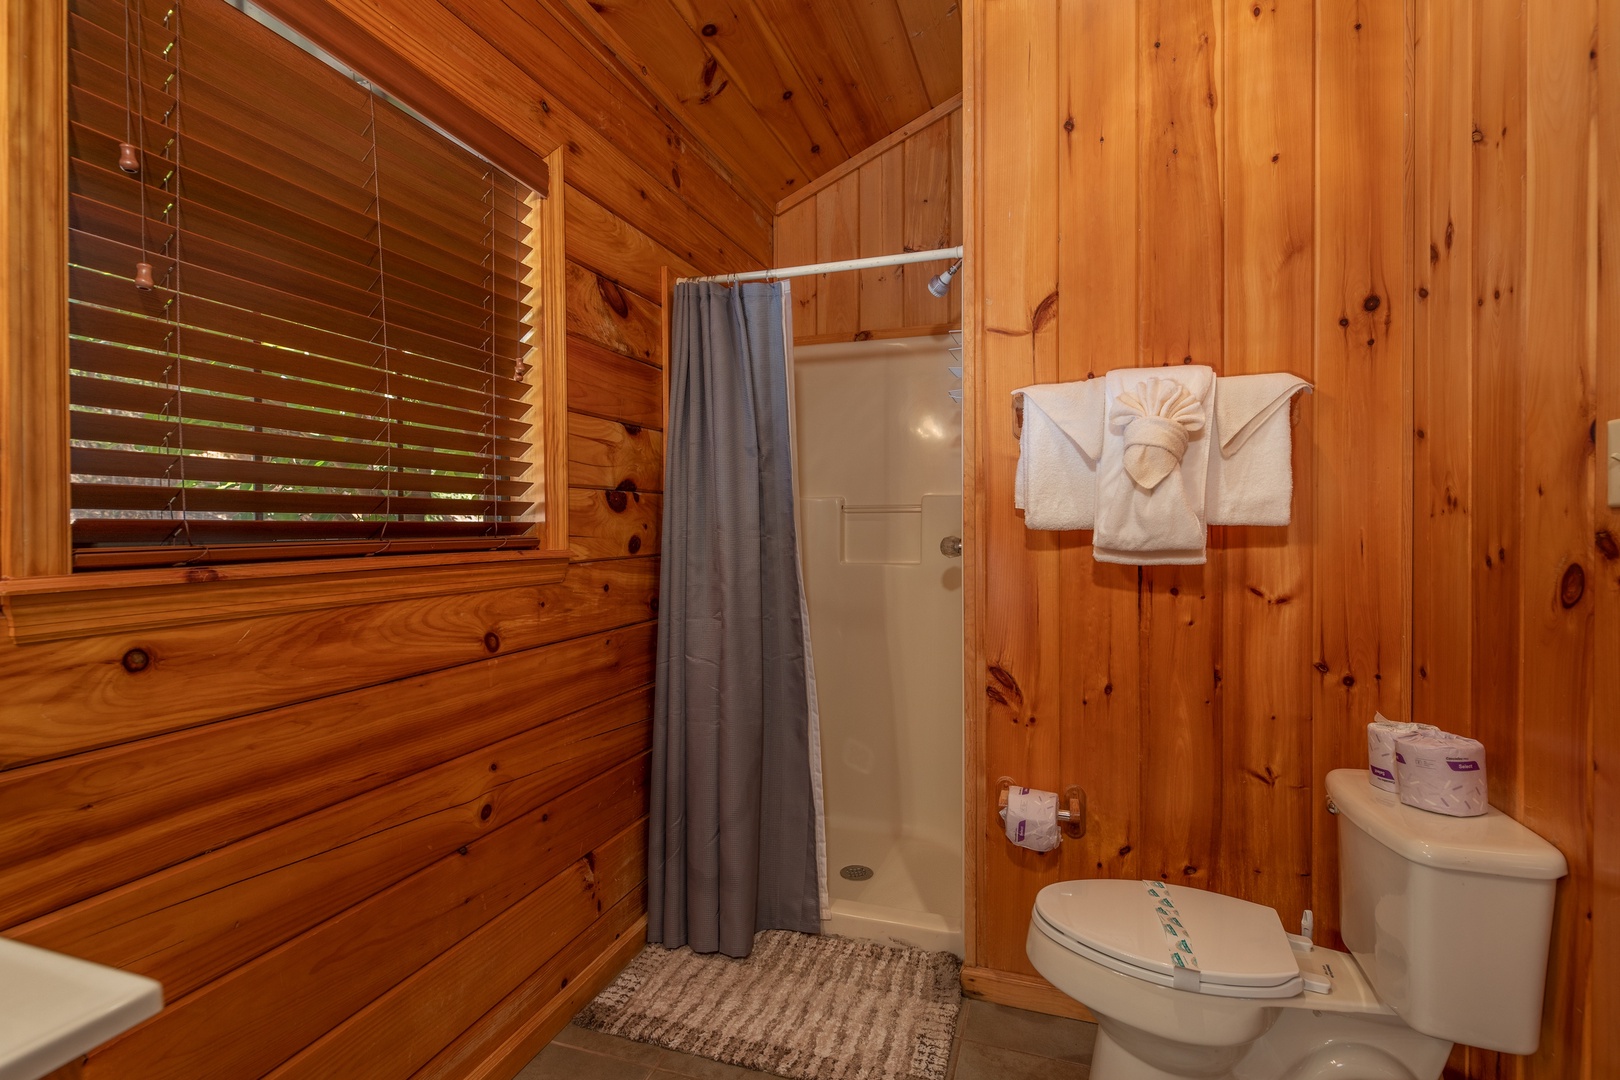 Bathroom with a shower at Hello Dolly, a 1 bedroom cabin rental located in Pigeon Forge